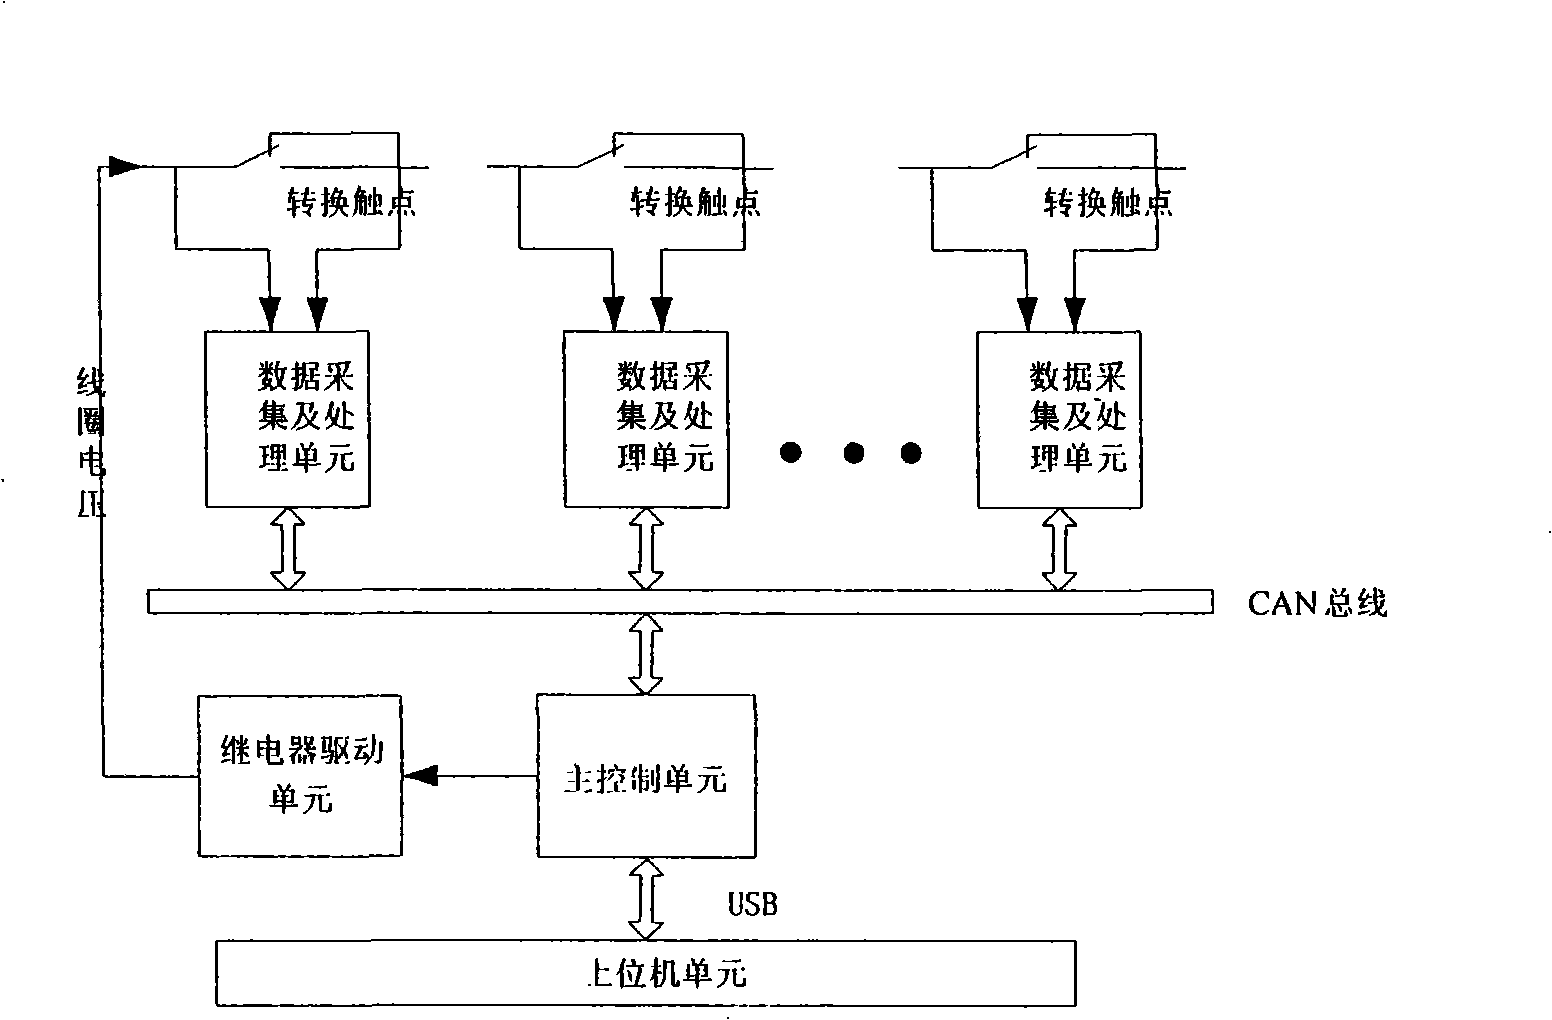 Relay reliability service life experiment system based on dynamic characteristic